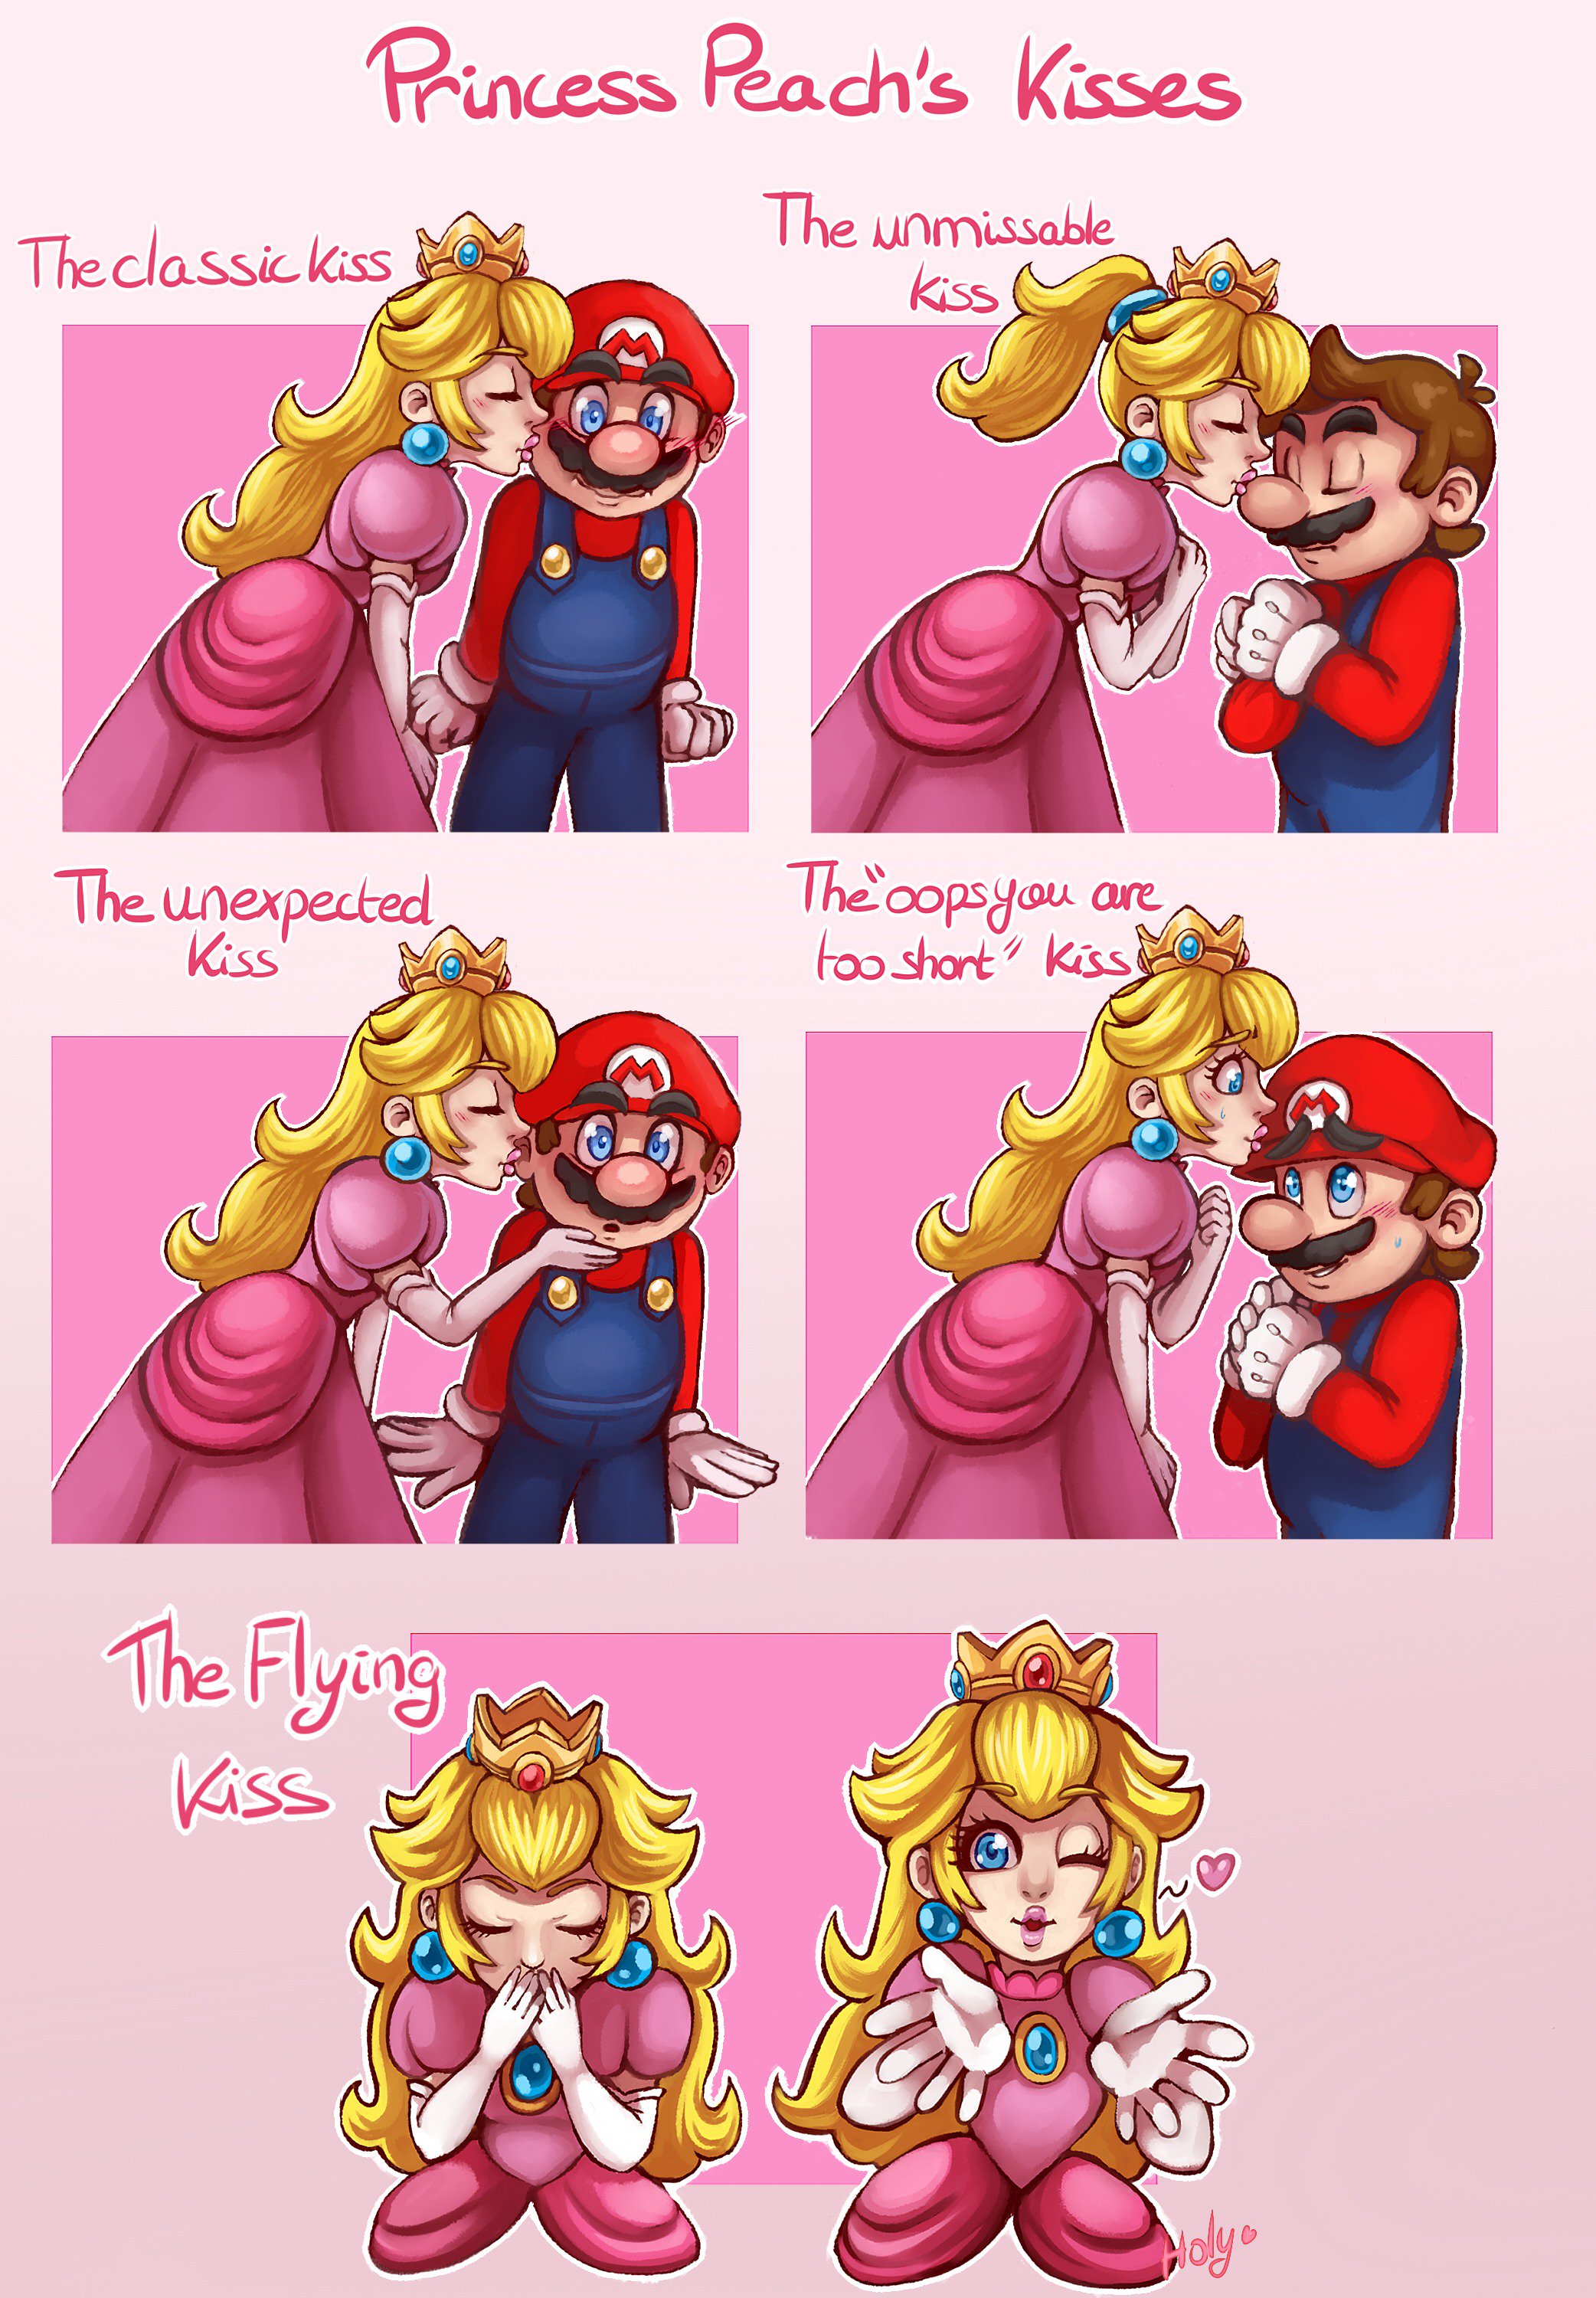 complicaciones En marcha Comportamiento LC-Holy on Twitter: "Kissu Kissu ~ Princess Peach's different kisses. I  drew this to practice drawing Peach and Mario and their expressions.  https://t.co/7Lgb5SRBEu https://t.co/hl3Bo5JYbV" / Twitter